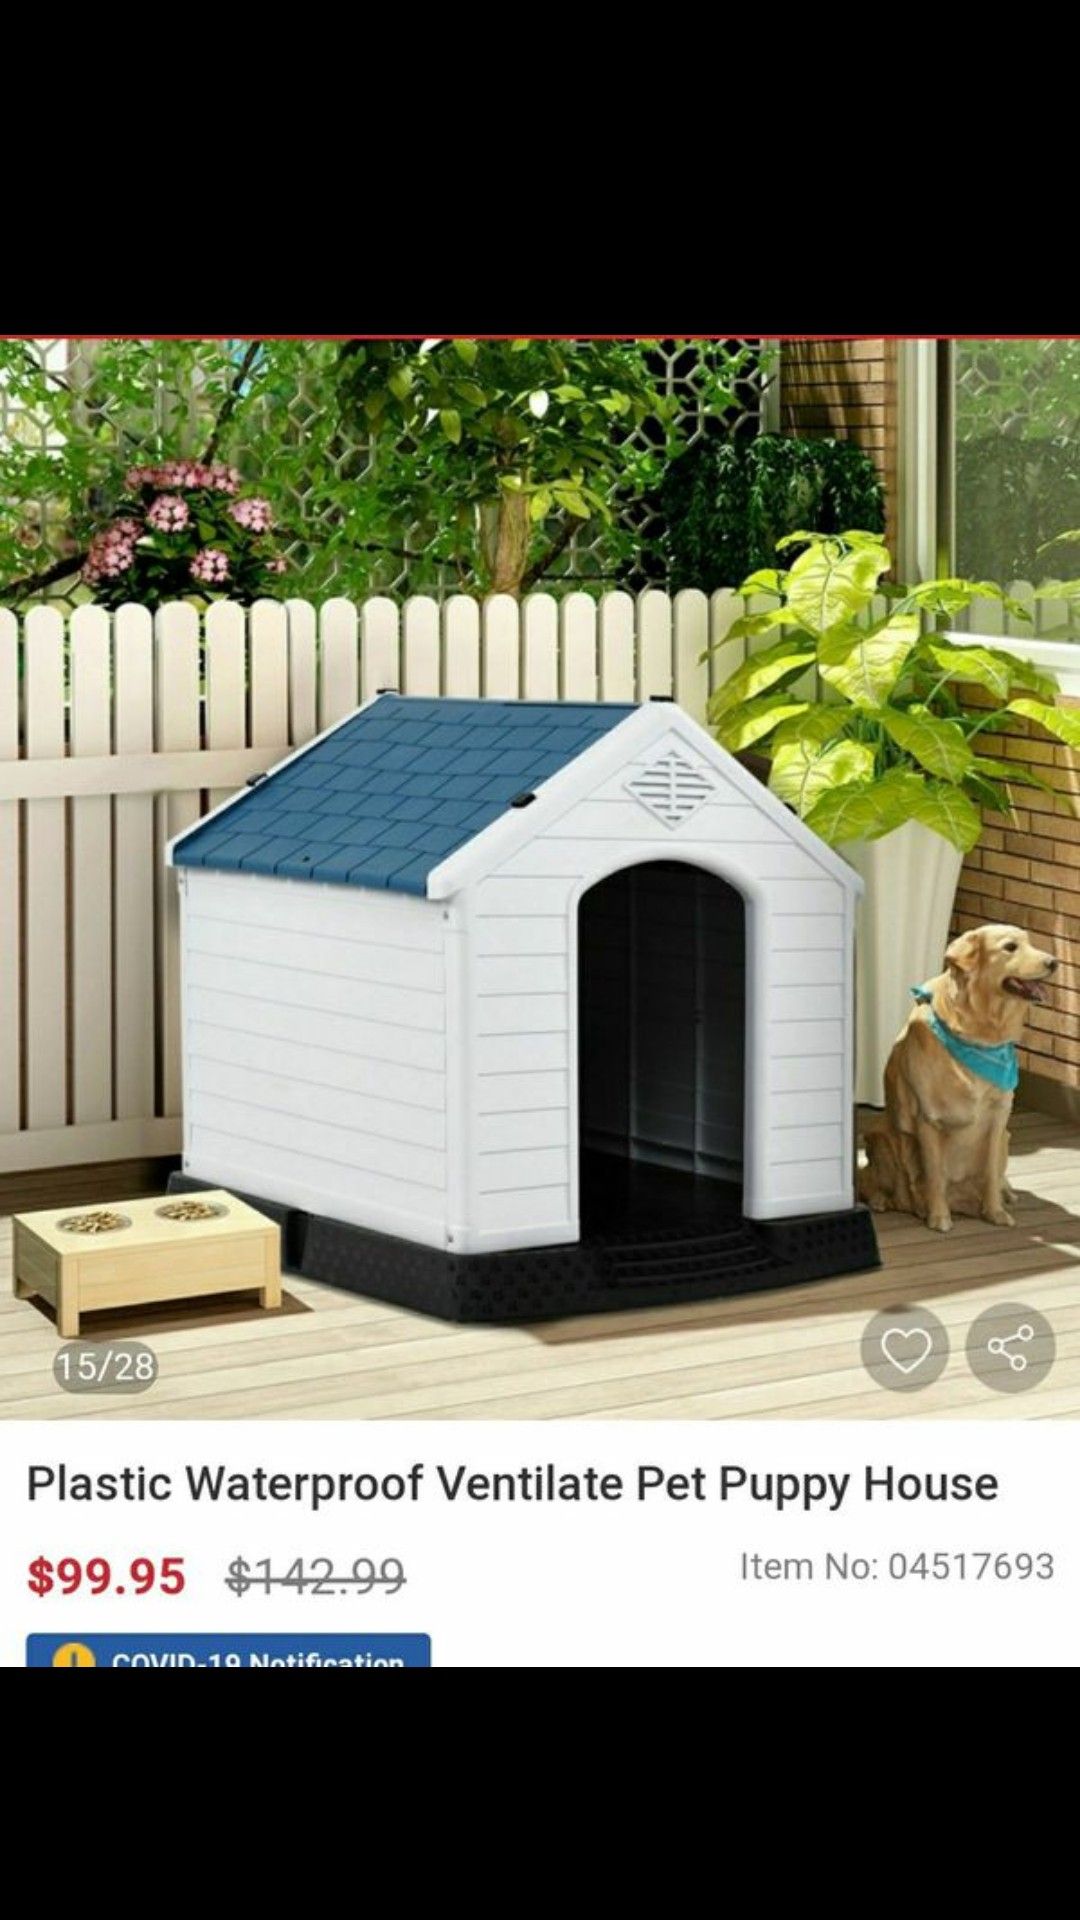 Plastic Waterproof Ventilate Pet Puppy House Retails 90 asking 60 please see other offers.